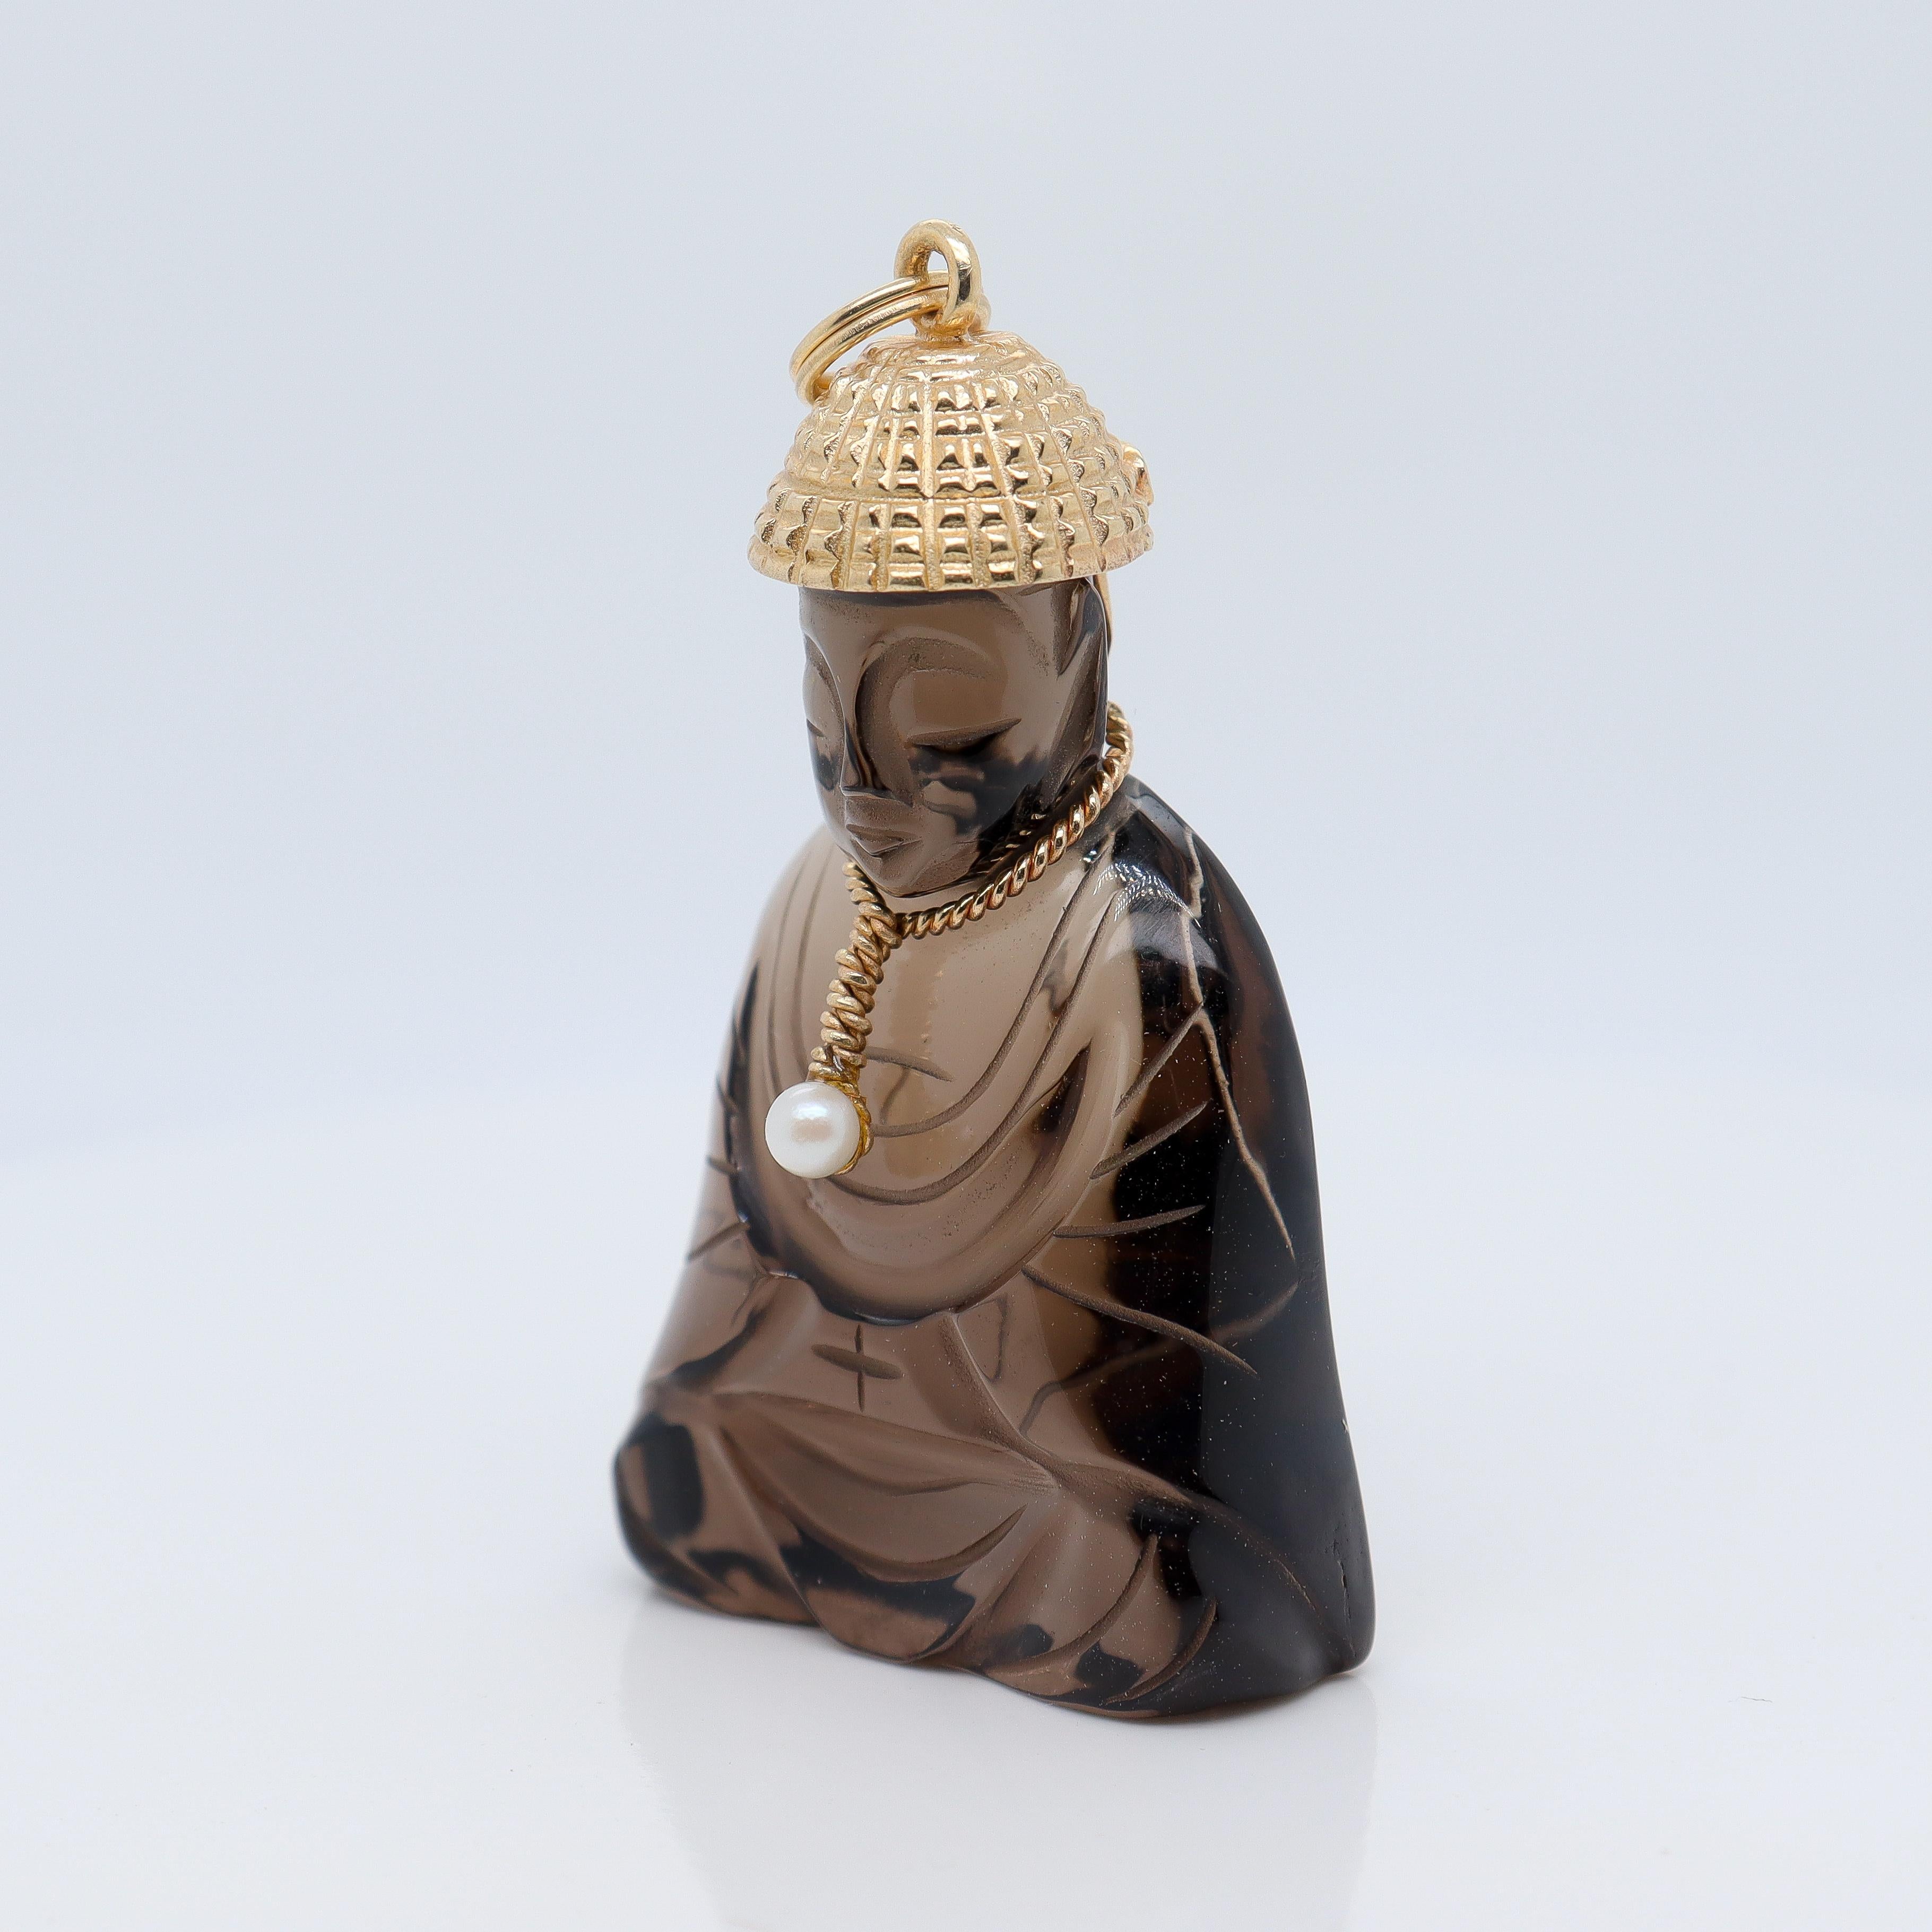 A fine retro gold, smoky quartz, and seed pearl pendant.

In 14K gold.

By the American Charm Co. 

In the form of a seated stylized Chinese Buddha. The body consisting of carved smoky quartz, the hat and necklace of gold, and the pendant of the